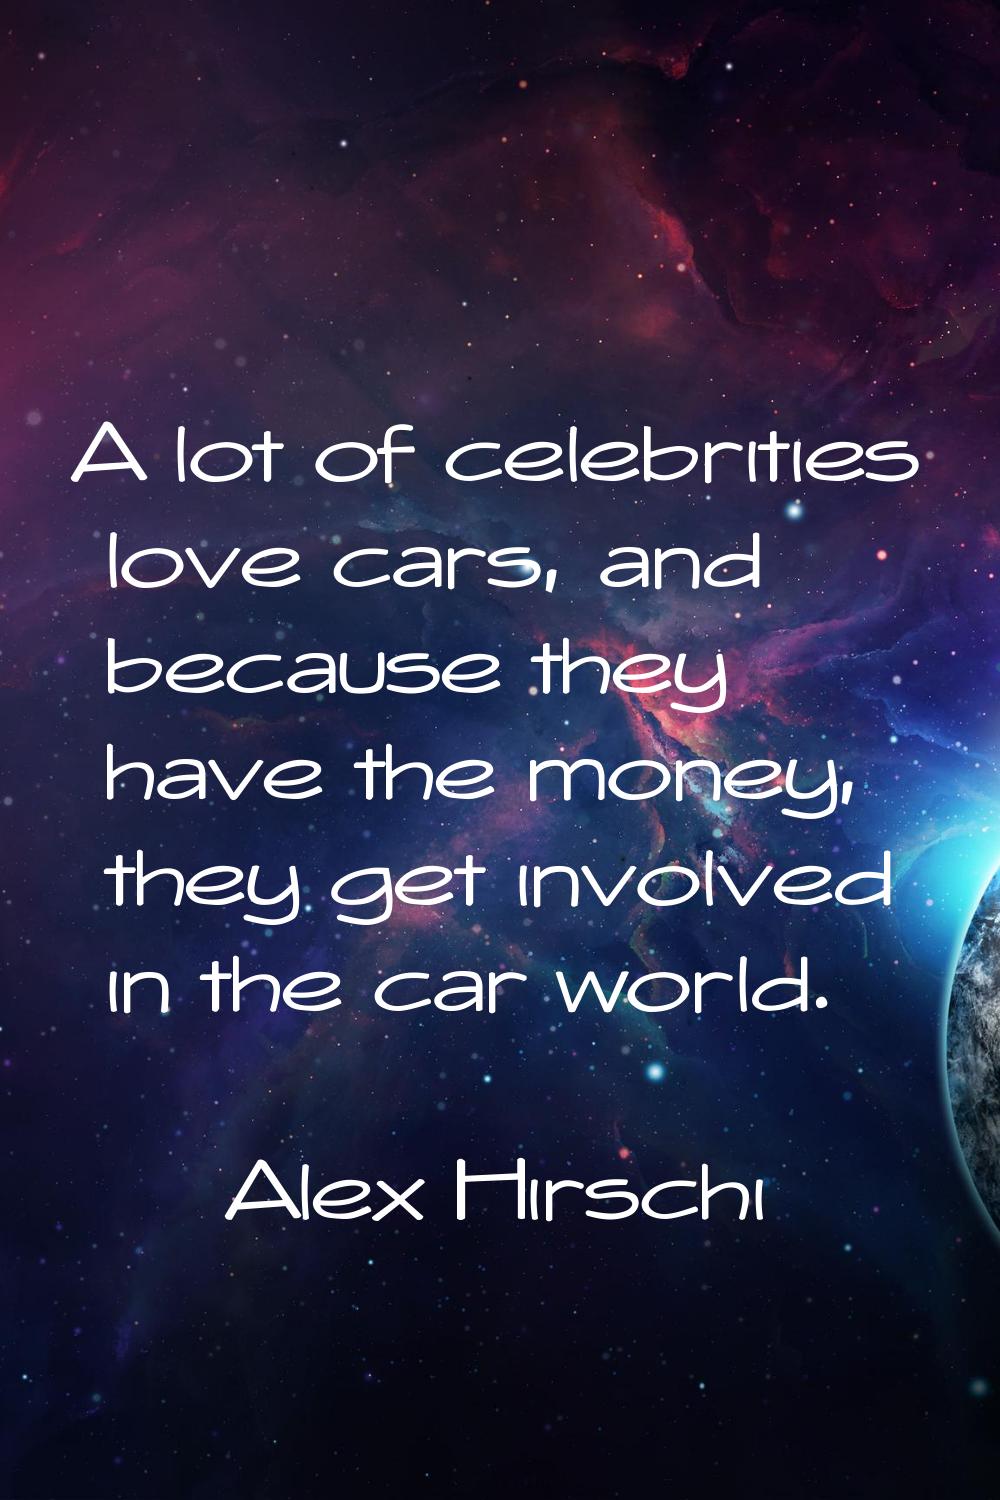 A lot of celebrities love cars, and because they have the money, they get involved in the car world